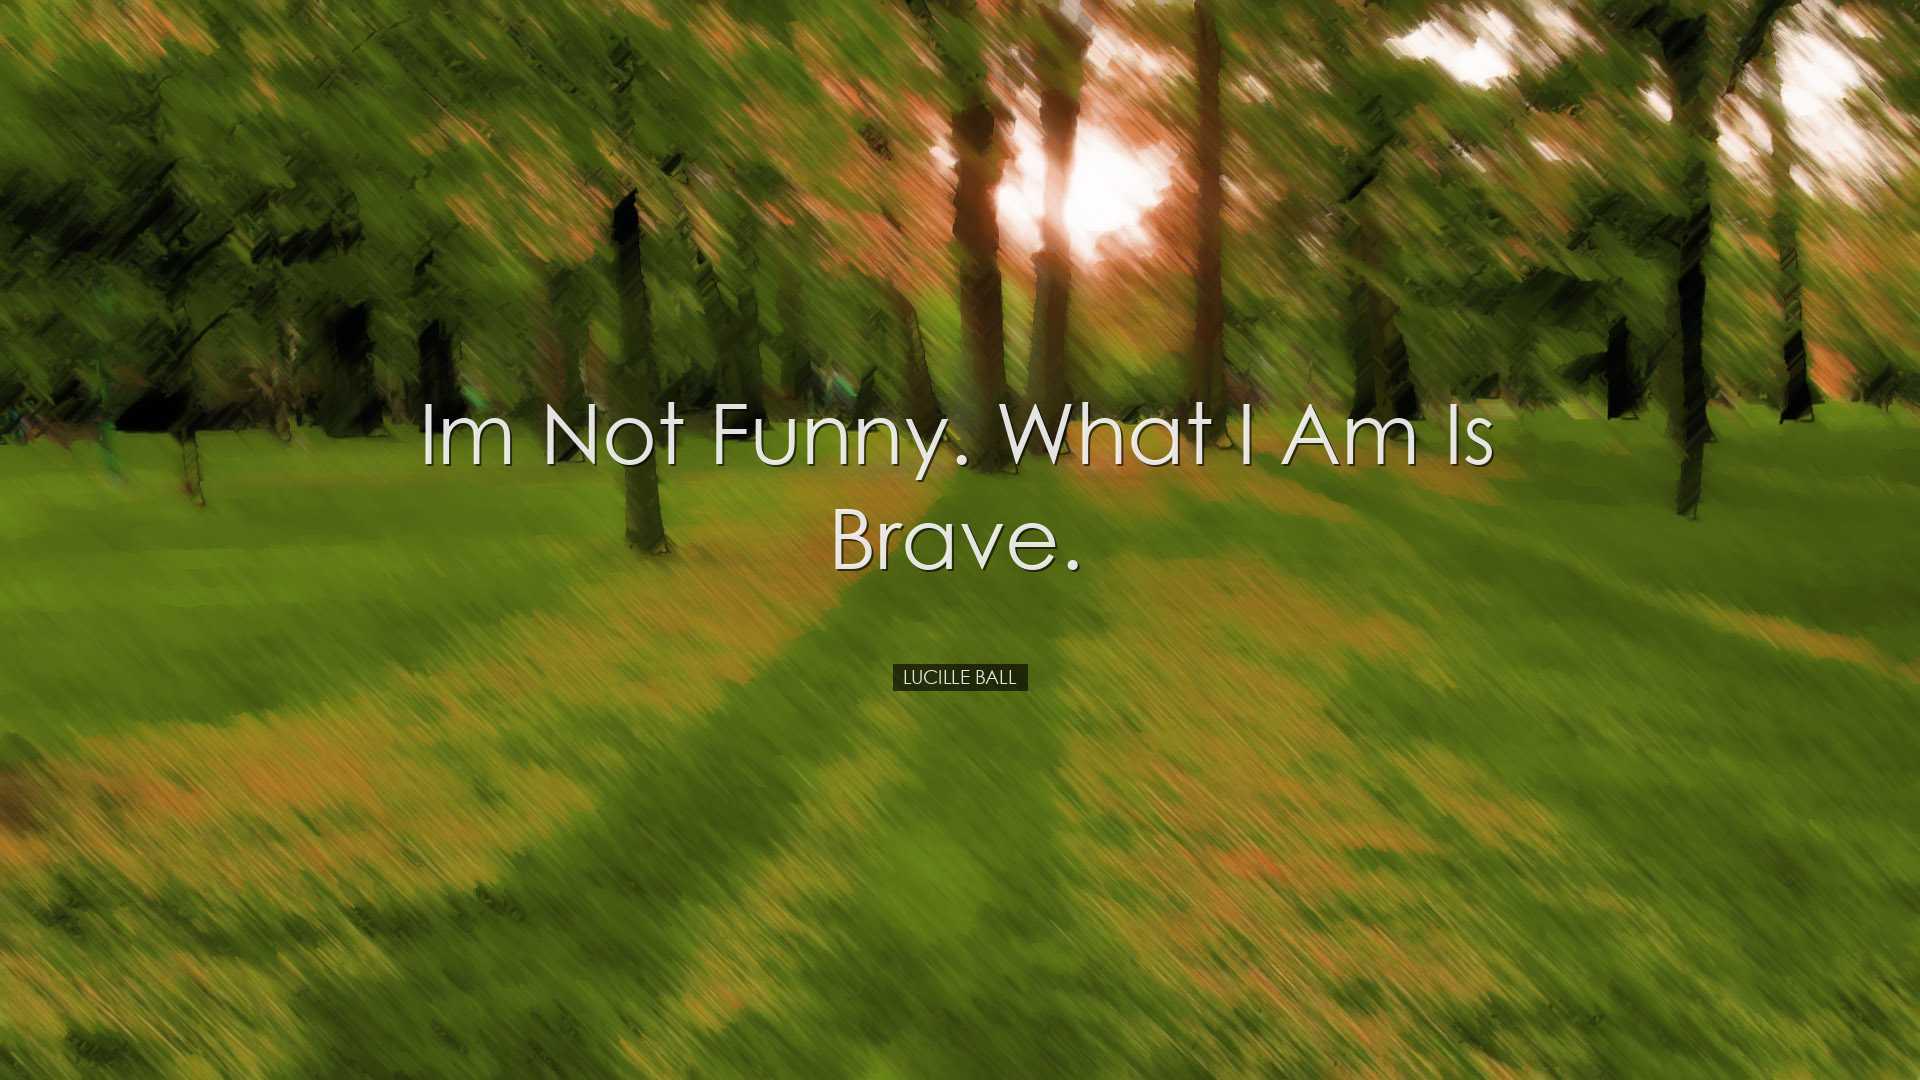 Im not funny. What I am is brave. - Lucille Ball